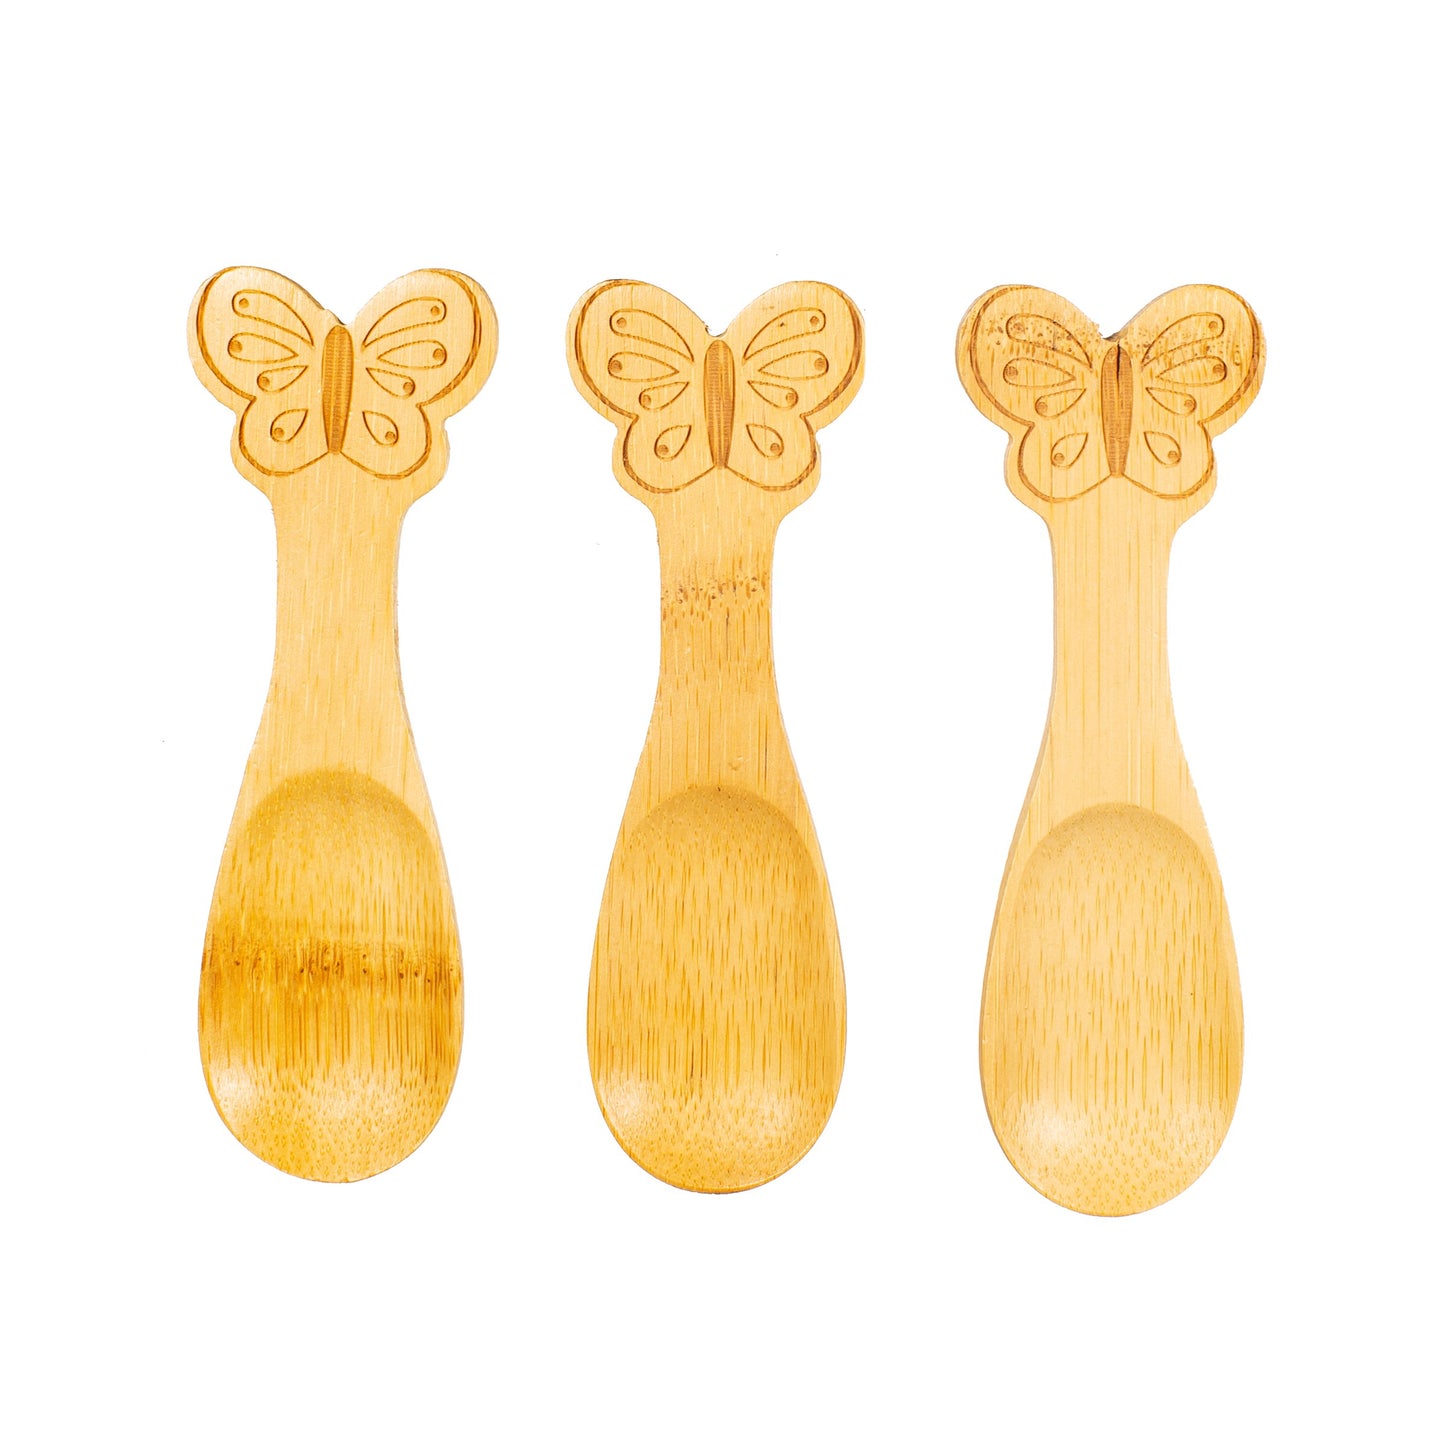 Explore nature with this planet-friendly everyday reusable bamboo spoon set, featuring a cute butterfly design.